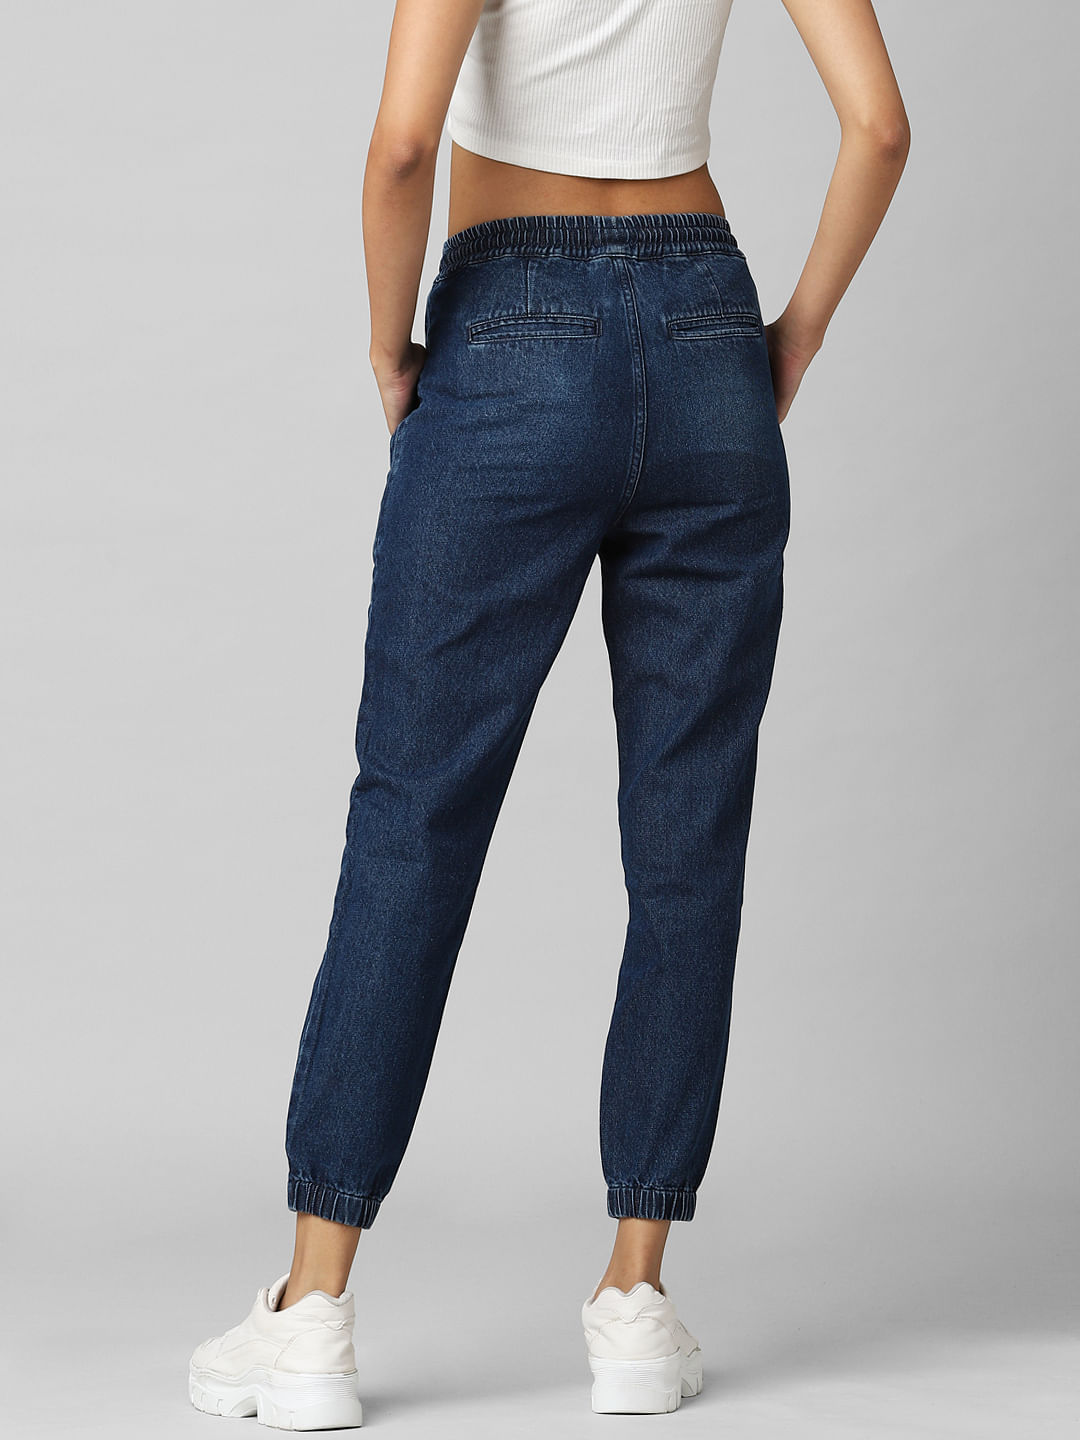 Ayman Fashion Jogger Fit Women Blue Jeans - Buy Ayman Fashion Jogger Fit  Women Blue Jeans Online at Best Prices in India | Flipkart.com